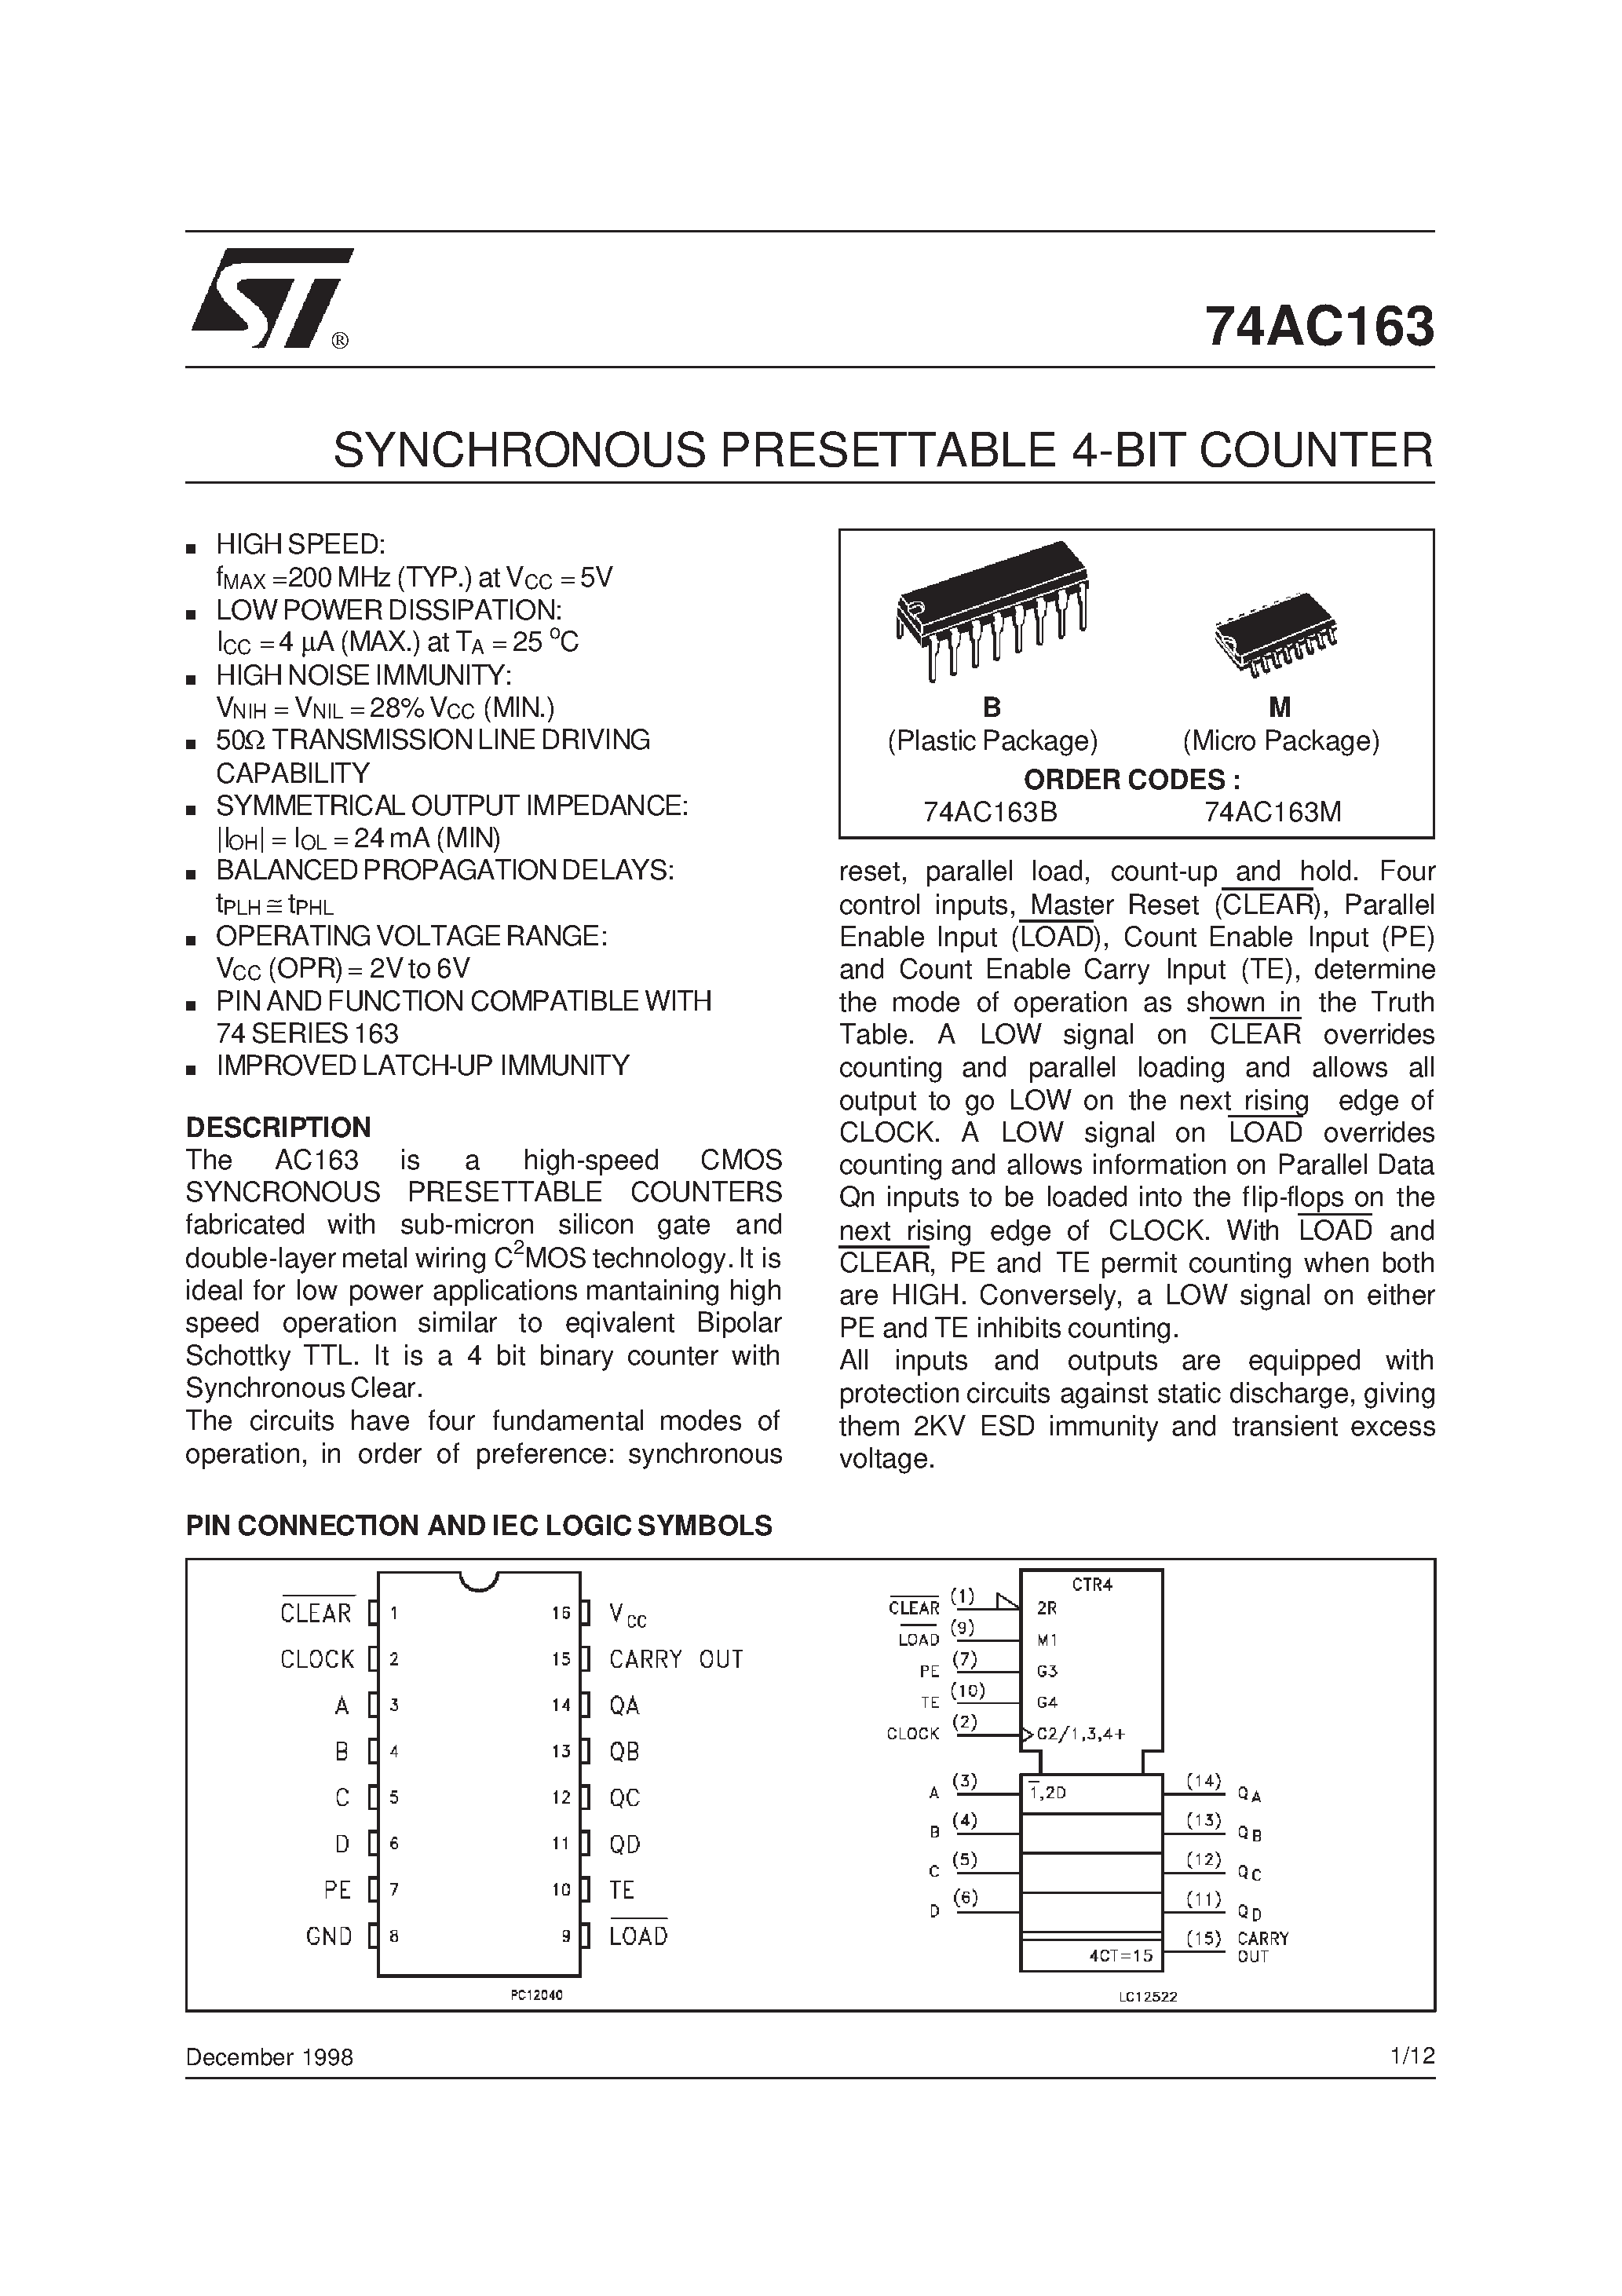 Datasheet 74AC163M - SYNCHRONOUS PRESETTABLE 4-BIT COUNTER page 1